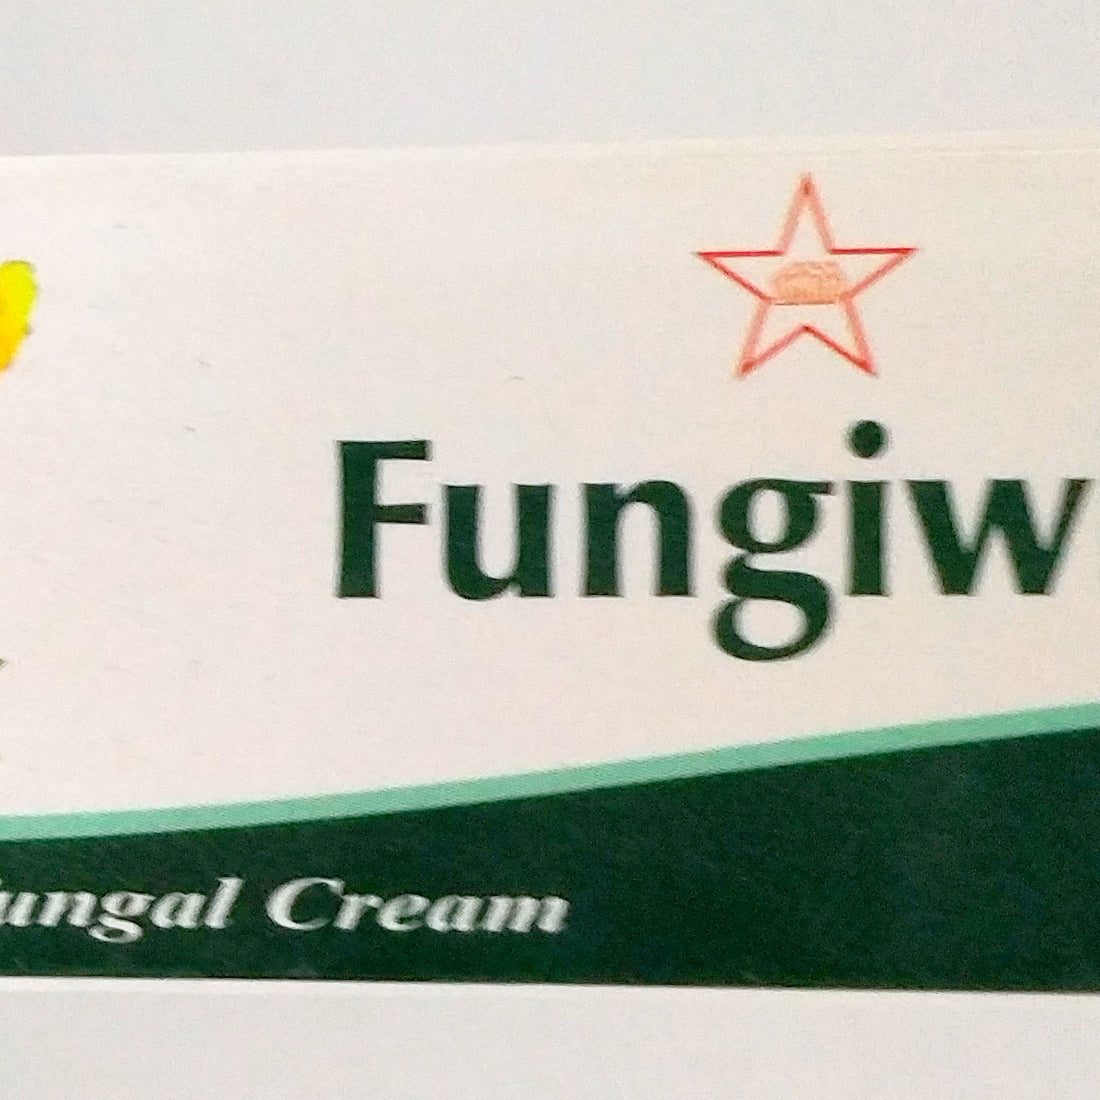 Shop SKM Fungiwin Ointment 35gm at price 105.00 from SKM Online - Ayush Care